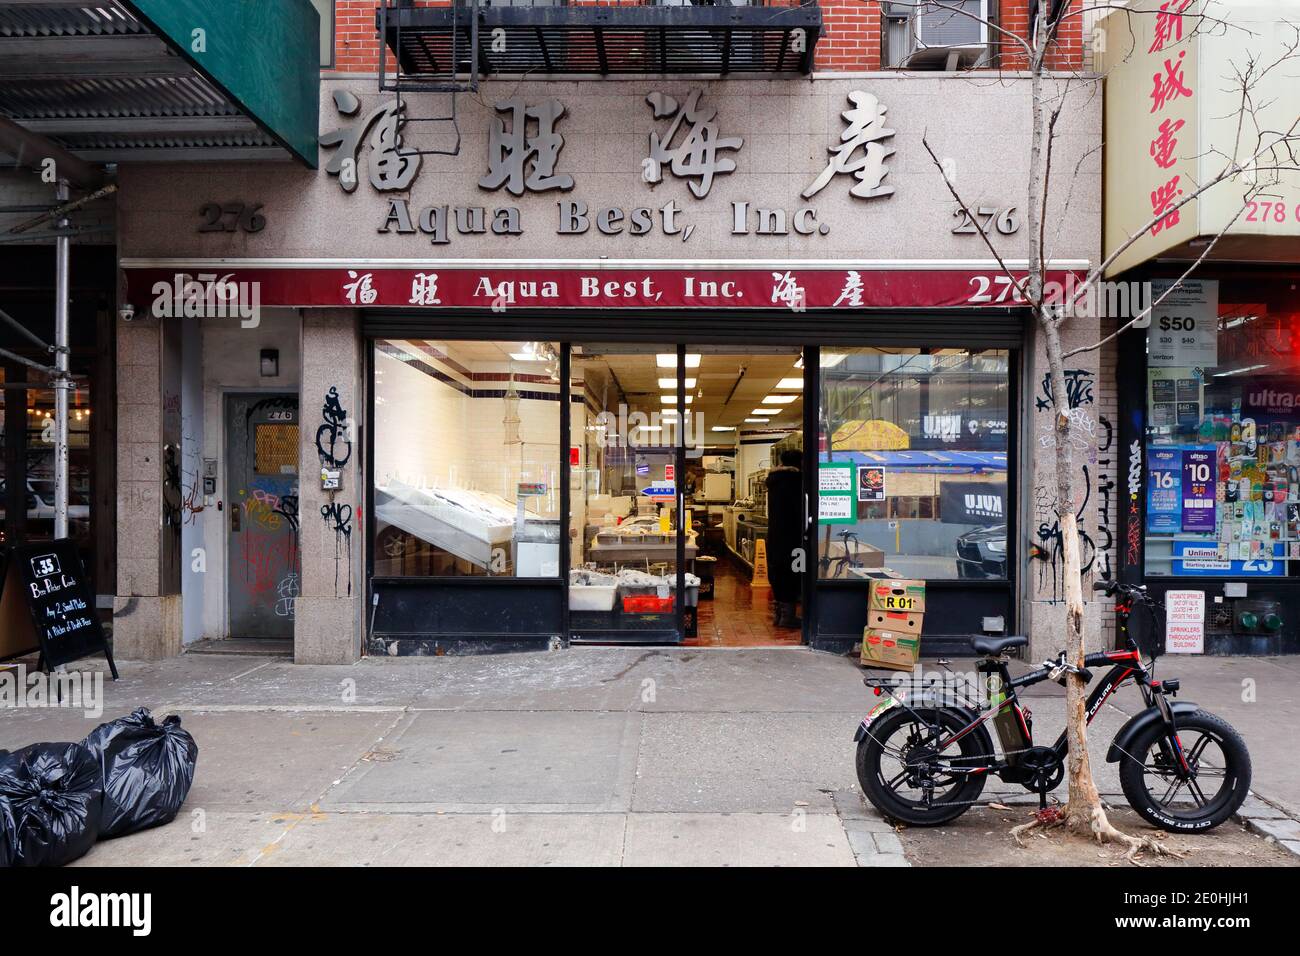 Aqua Best 福旺海產, 276 Grand St, New York, NY. exterior storefront of a seafood distributor and fish market in Manhattan Chinatown. Stock Photo